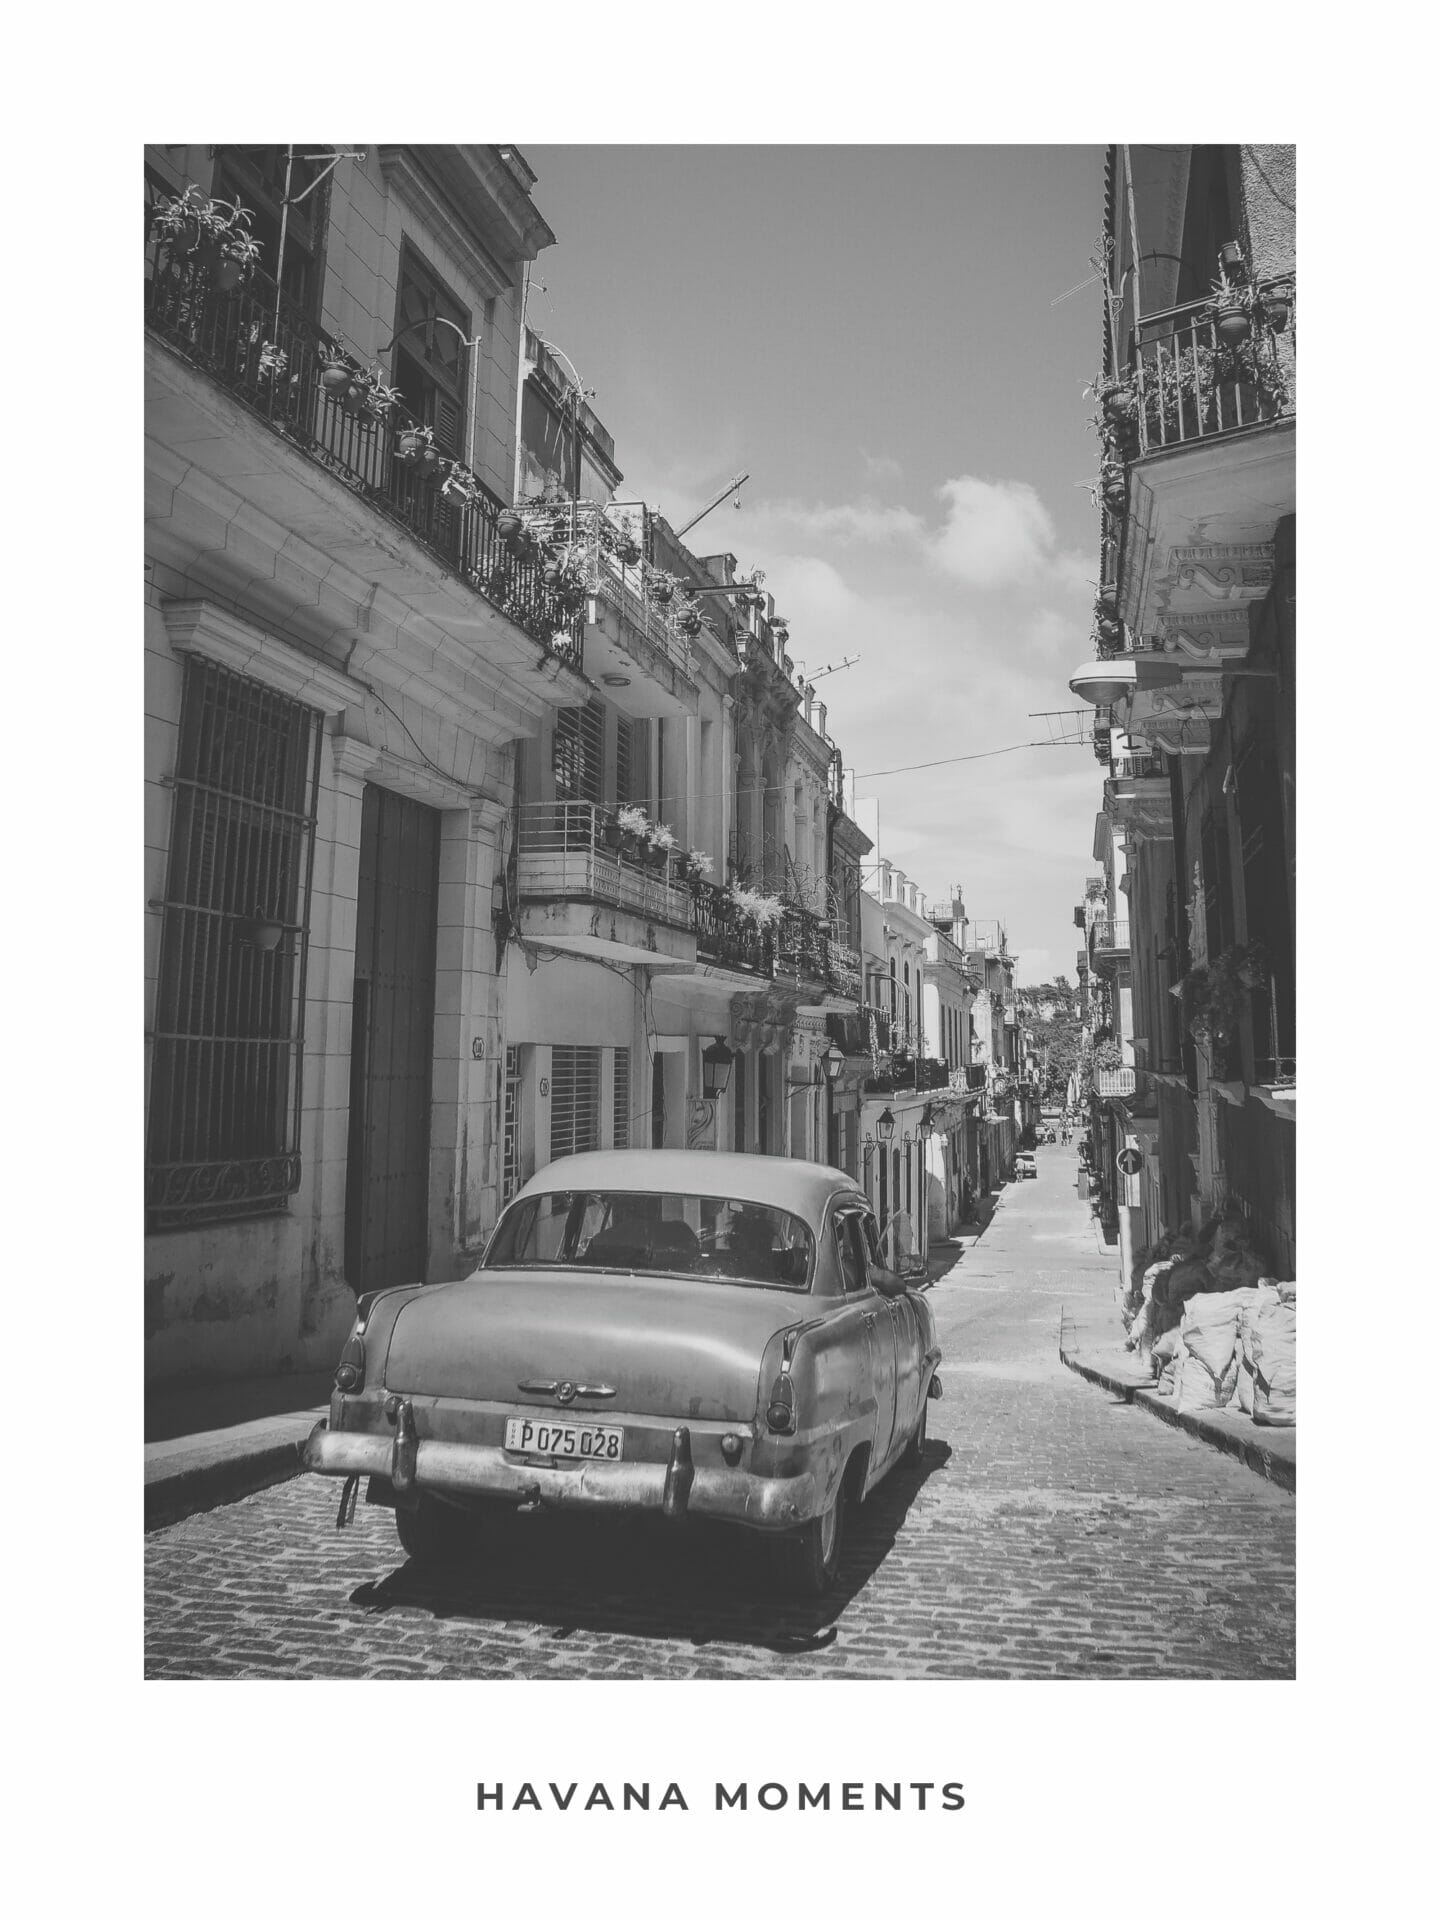 Poster of vintage car driving in old parts of Havana